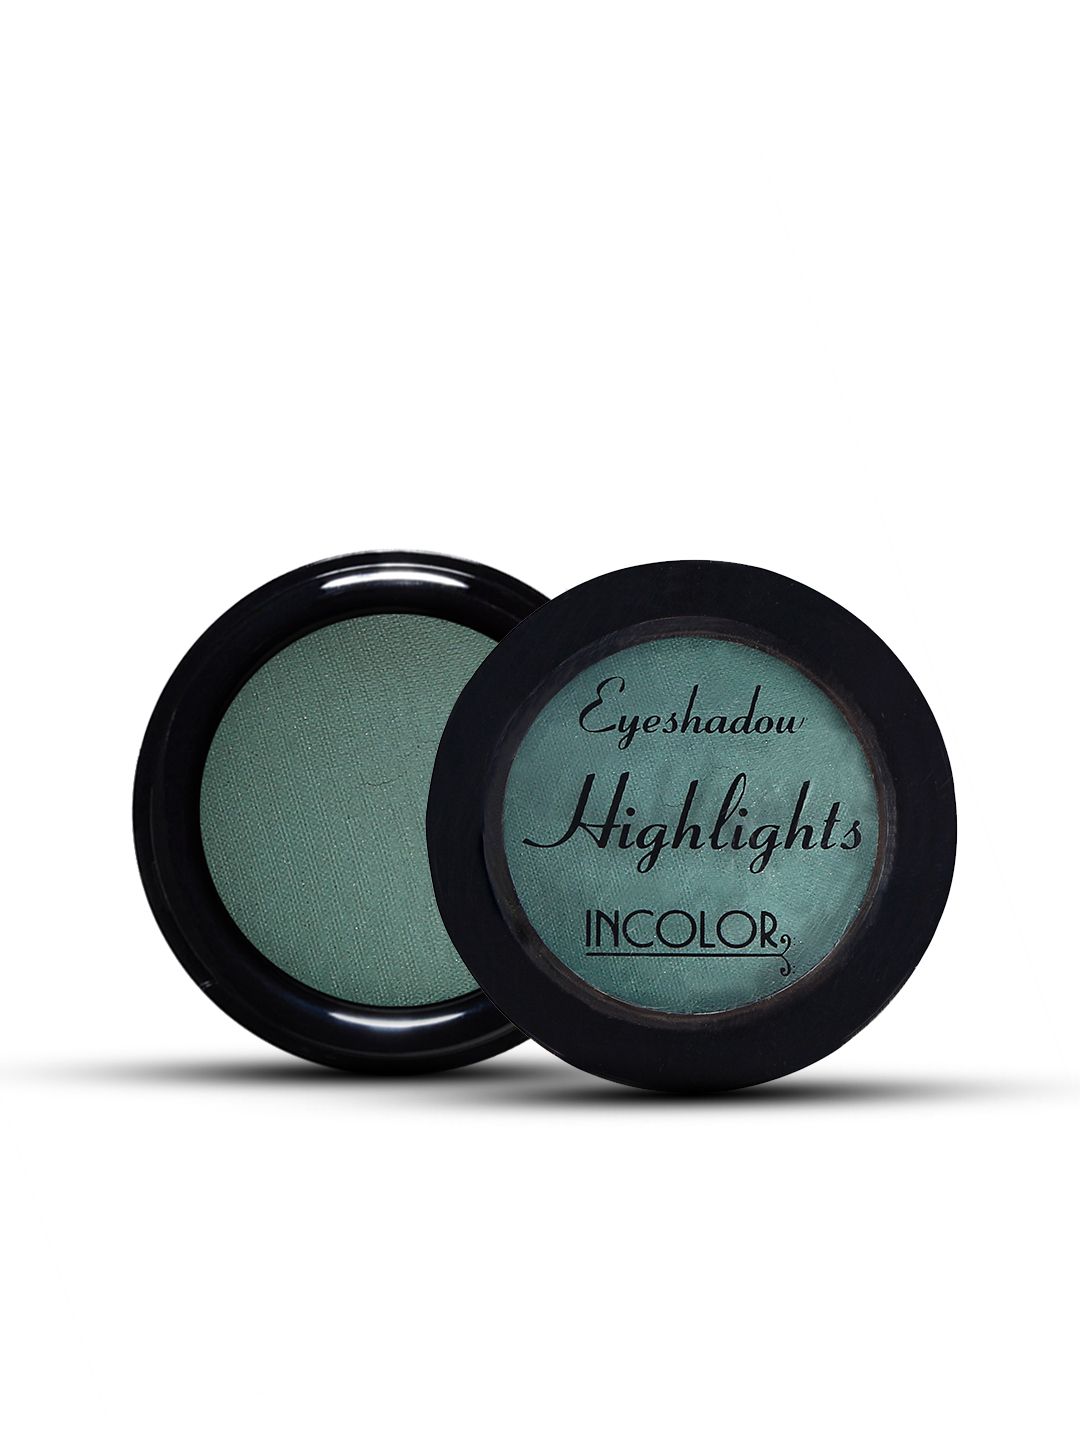 INCOLOR Teal Green Highlight Eyeshadow 07 4.5 gms Price in India